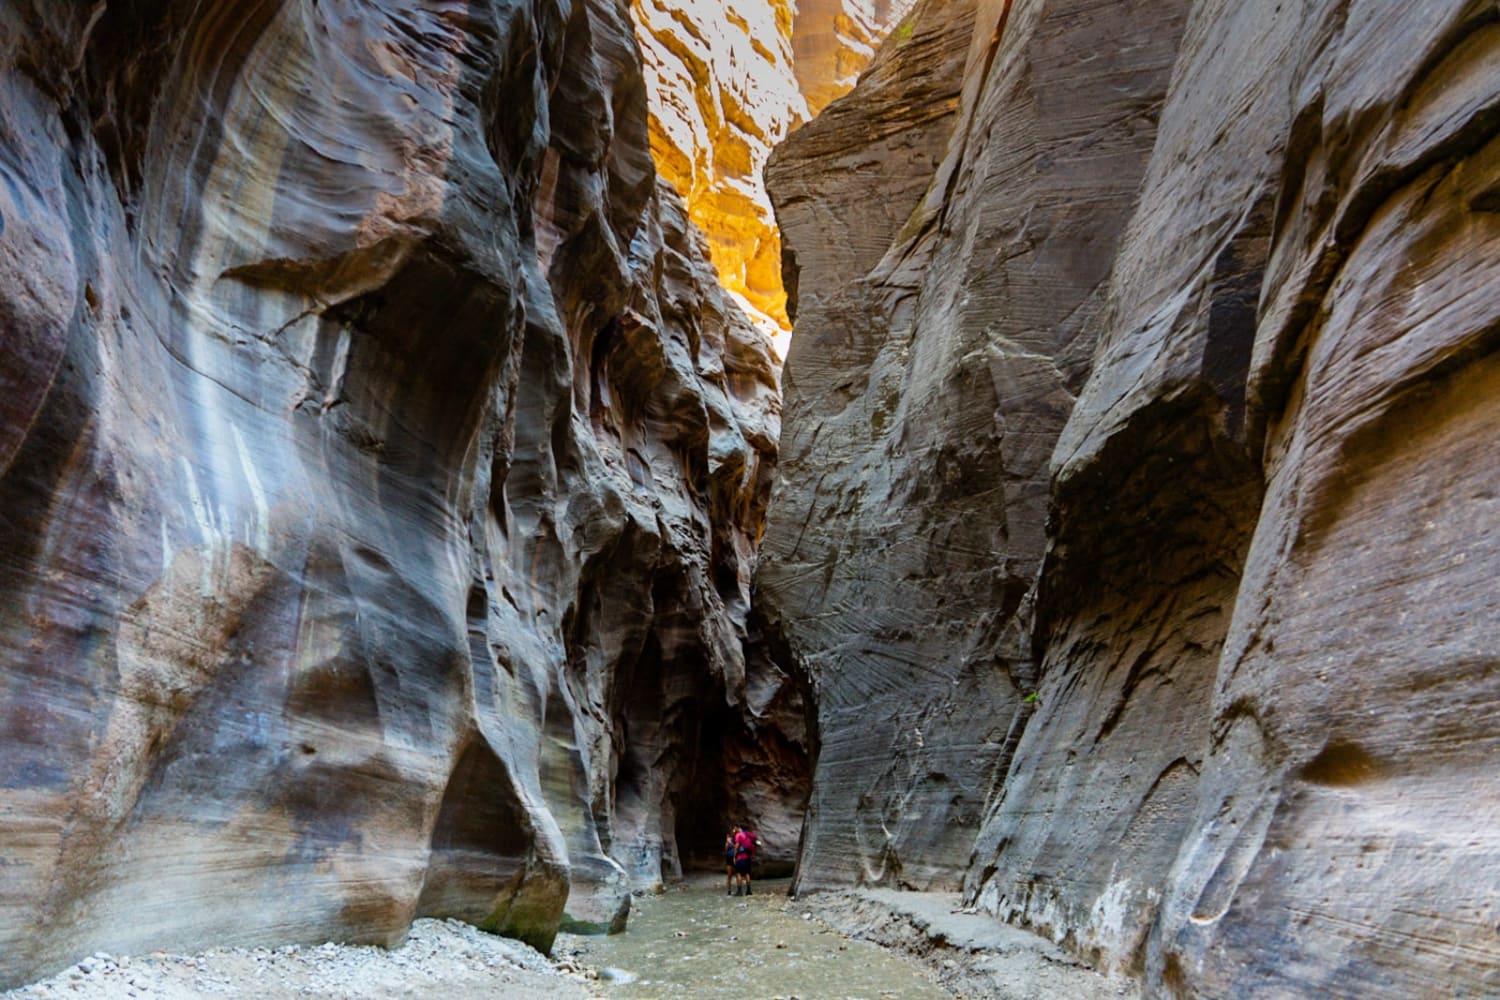 A Beginner's Guide to Hiking the Narrows in Zion